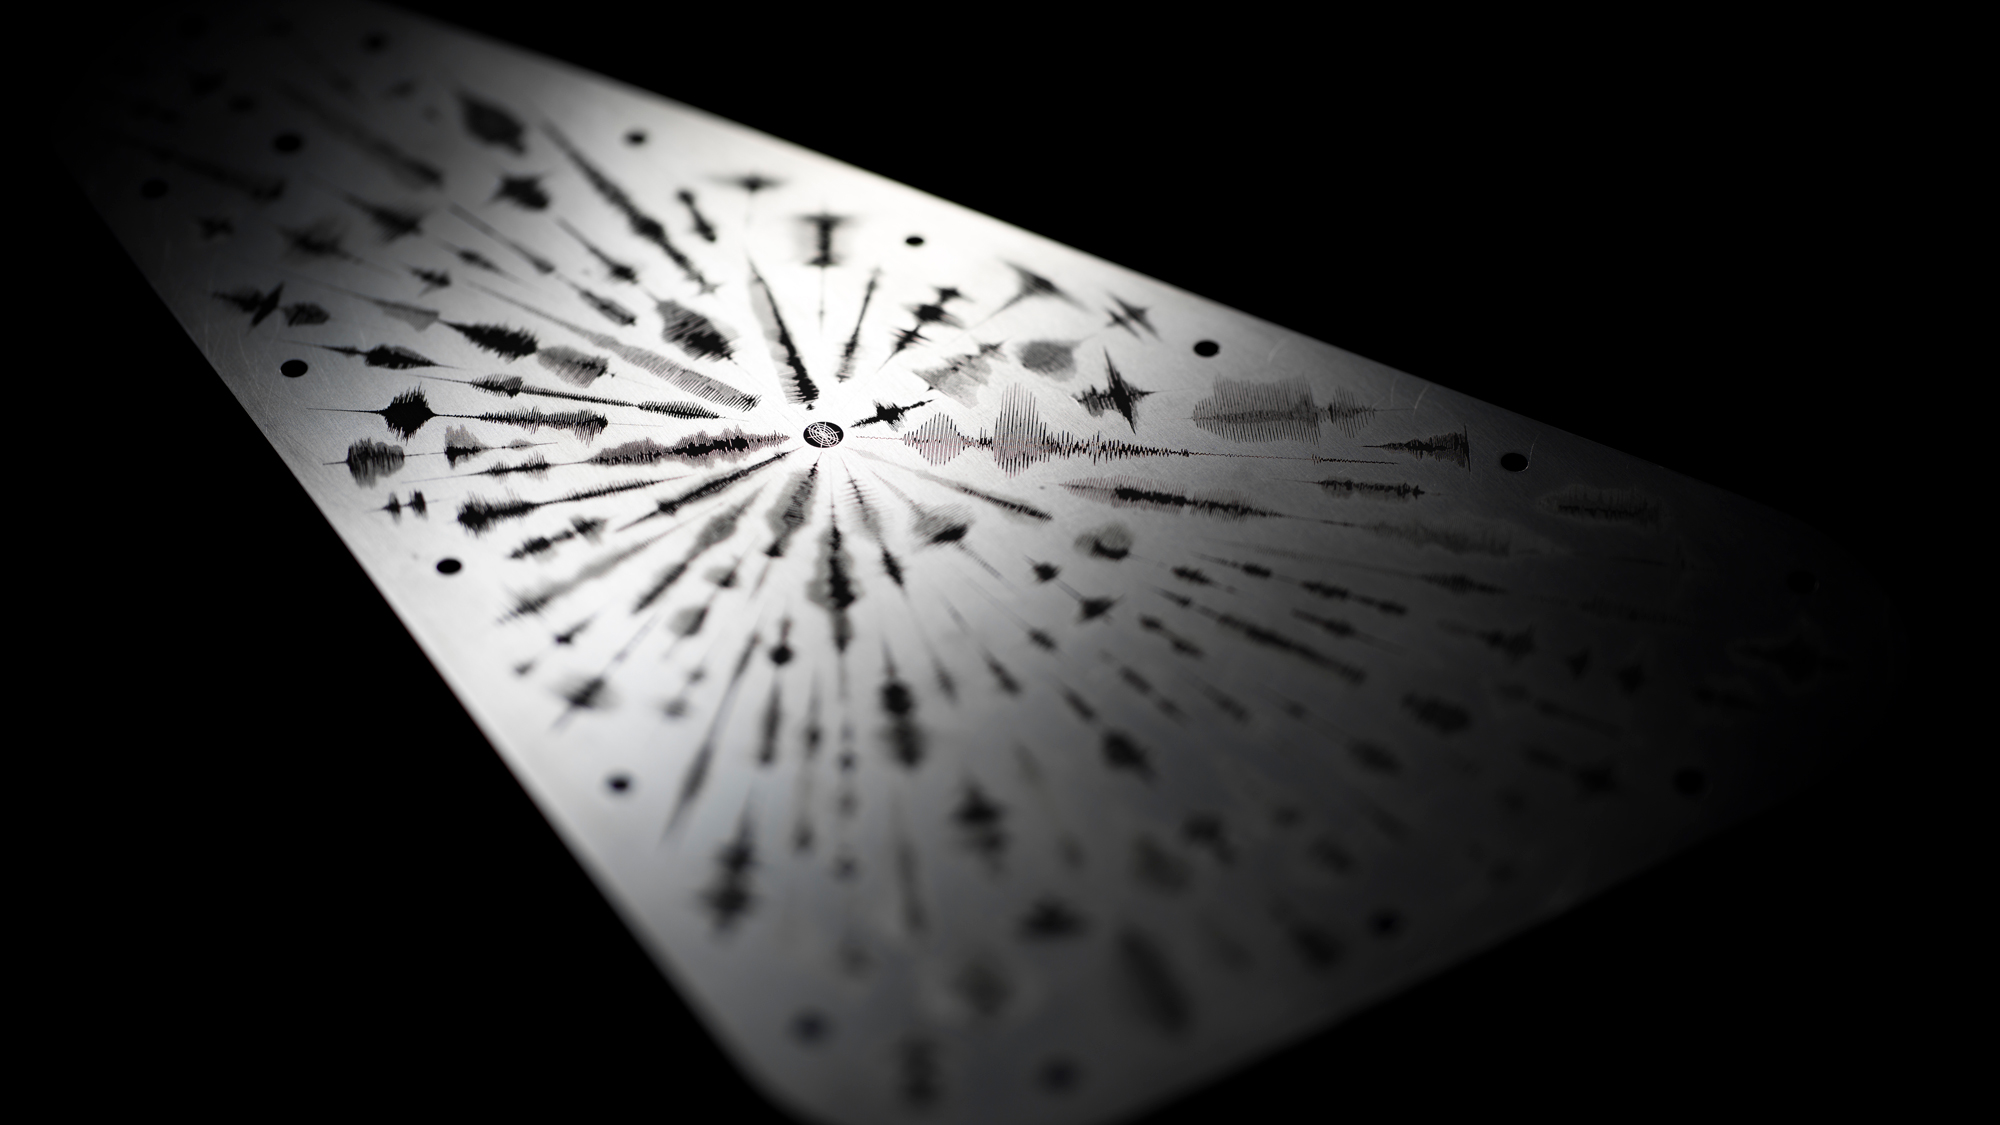 An image of the Europa Clipper vault plate, highlighted from the upper left corner casting shadows that emphasize engraved waveforms emanating from a central point symbolizing the word 'water' in multiple languages. The waveforms present as audio frequency waves. The vault plate is metal silver and the engravings are black, set against a black background.